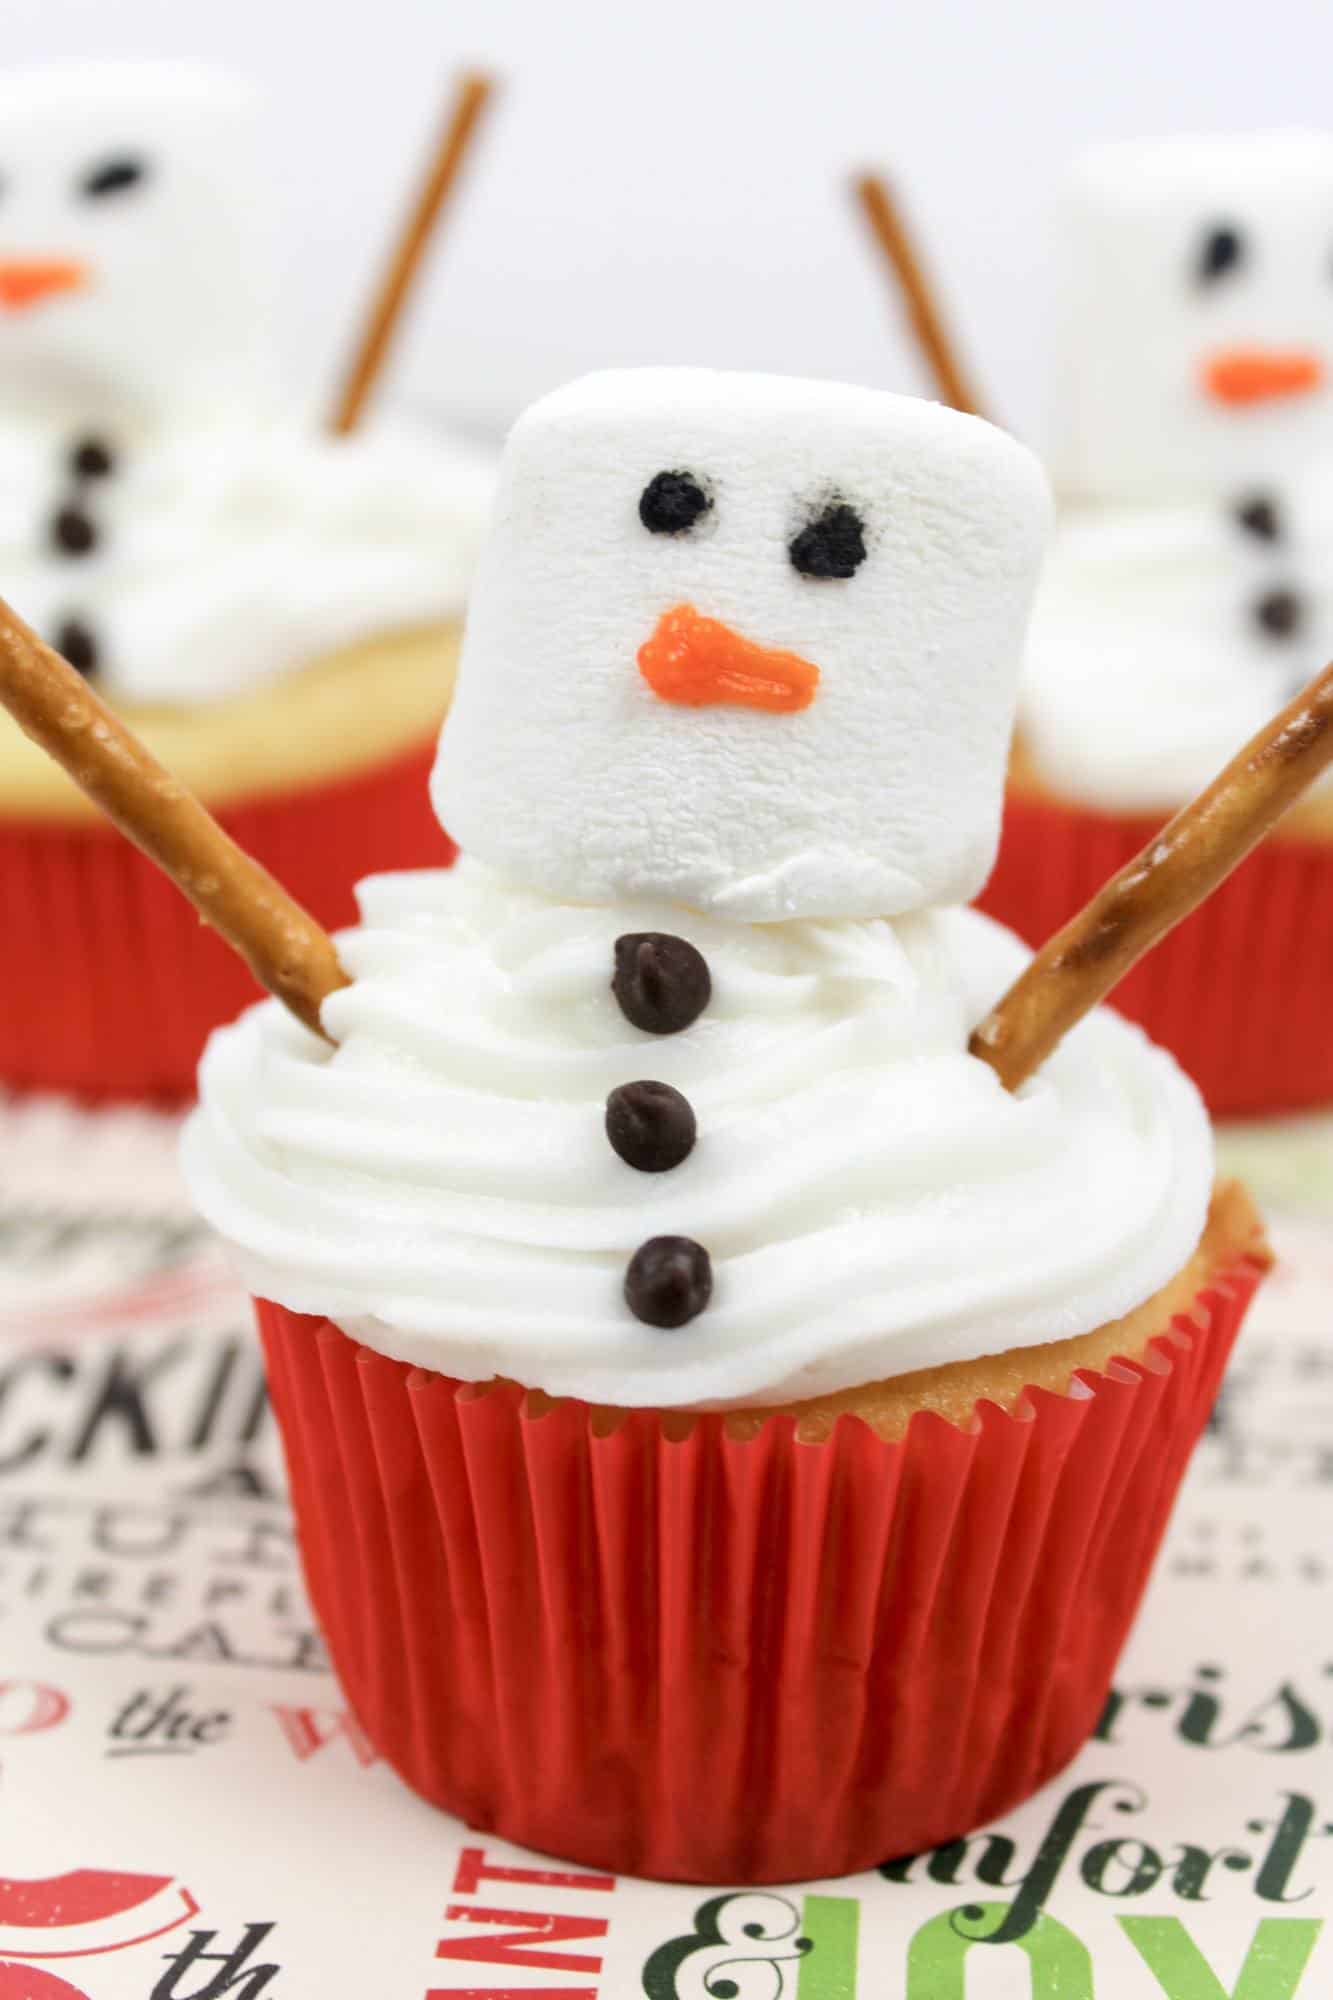 a vanilla cupcake with vanilla frosting as a snowman.